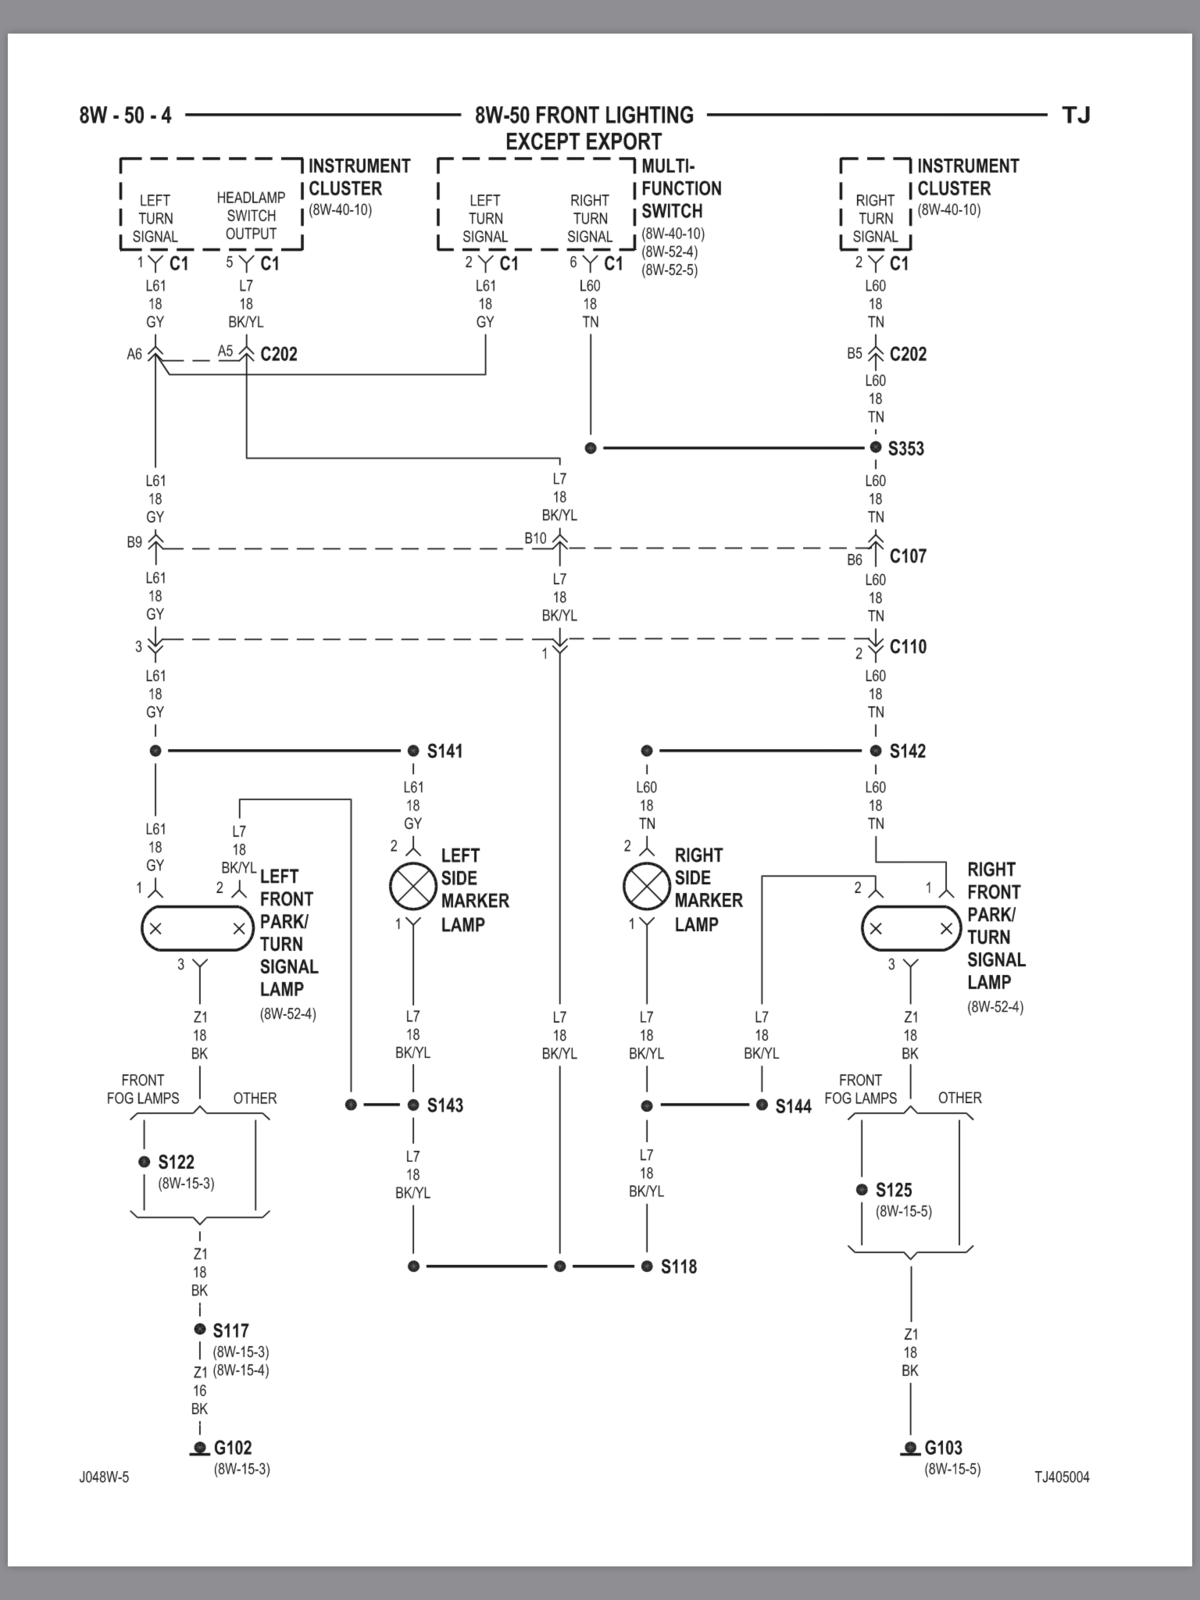 Wiring Guide or Diagram | Jeep Wrangler TJ Forum 87 Jeep YJ Wiring Diagram Jeep Wrangler TJ Forum